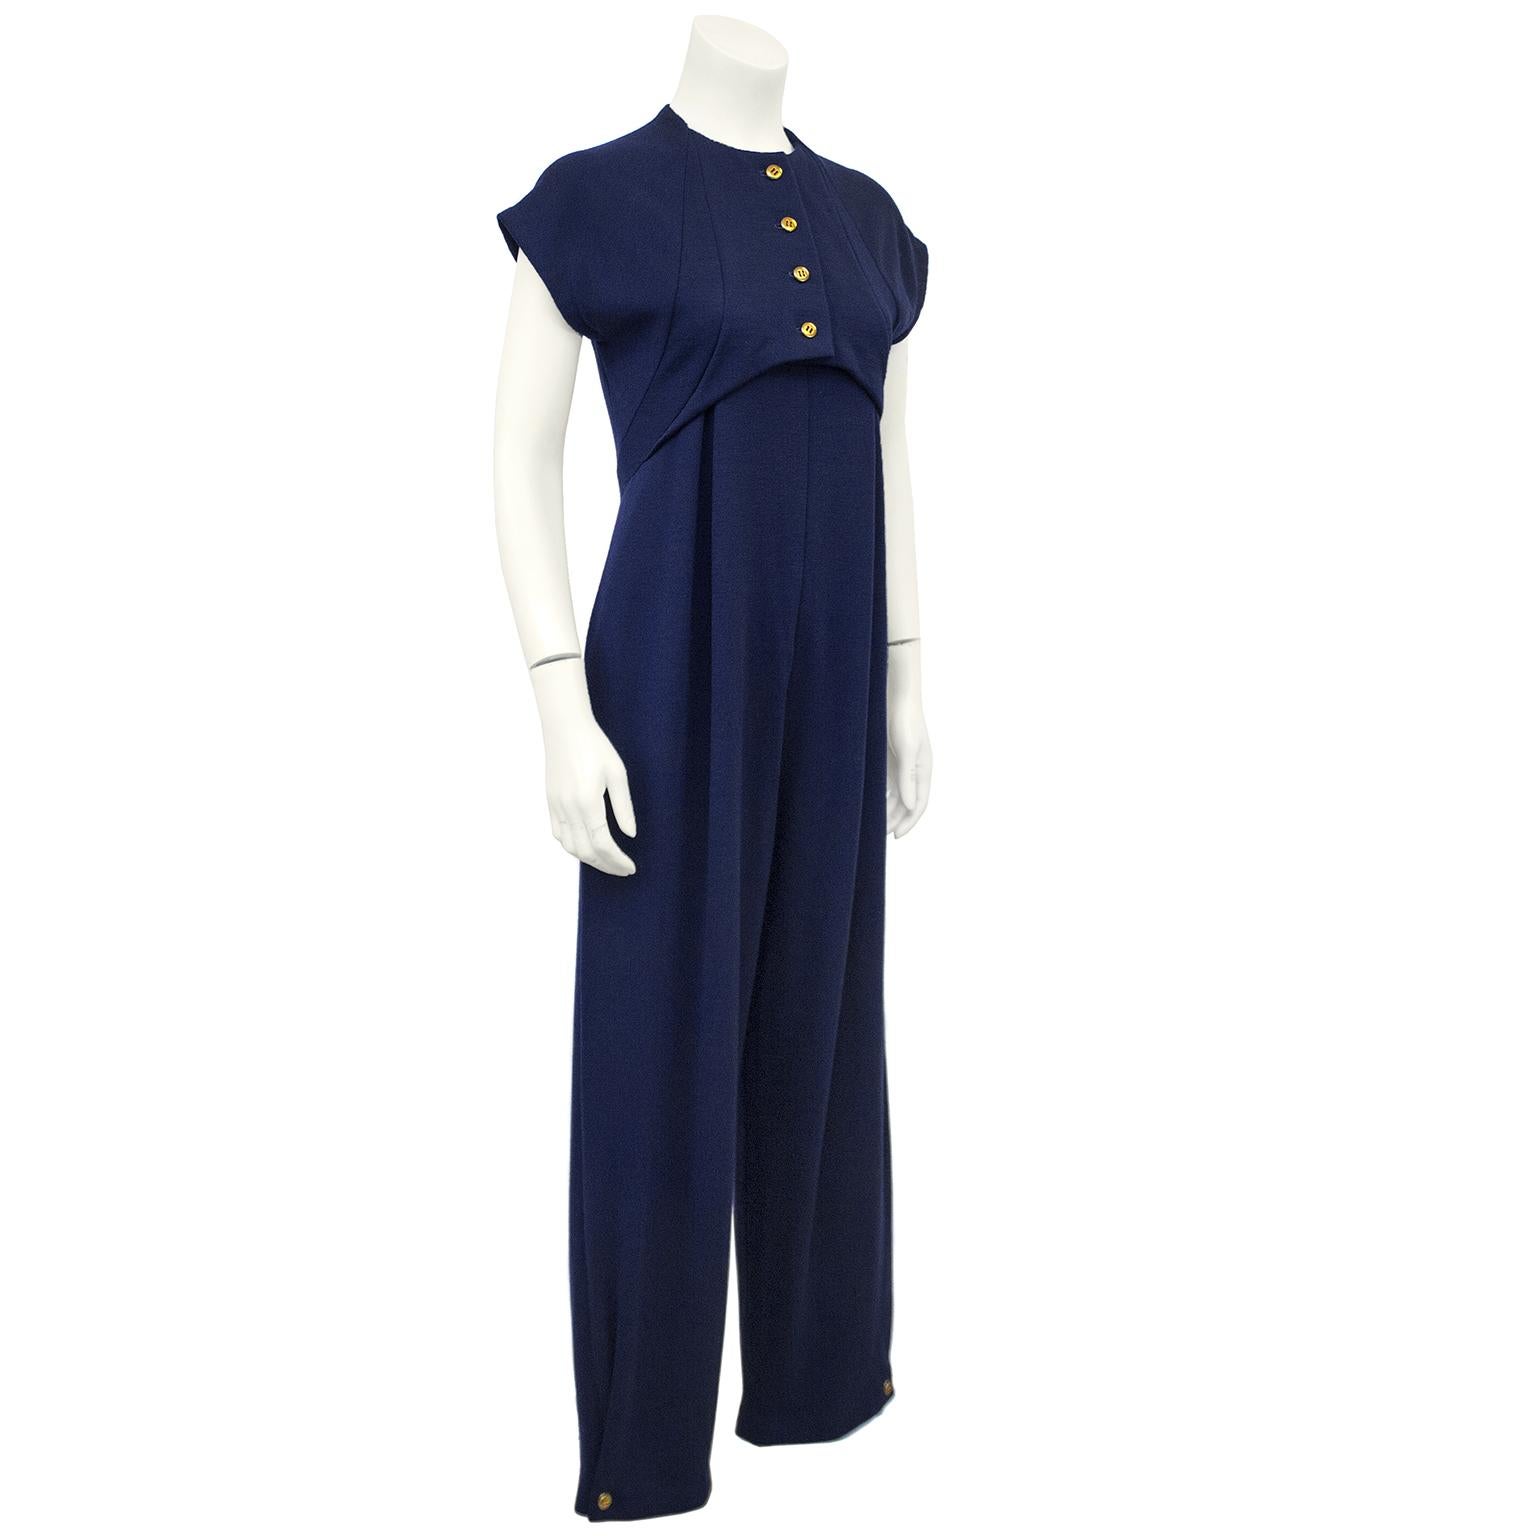 Cap sleeved Geoffrey Beene navy wool jersey blend jumpsuit from the 1980s. The overlaying top has gold buttons down the front and appears like a cropped bolero with curved seams down the sides and hits just below the breast bone. The body of the